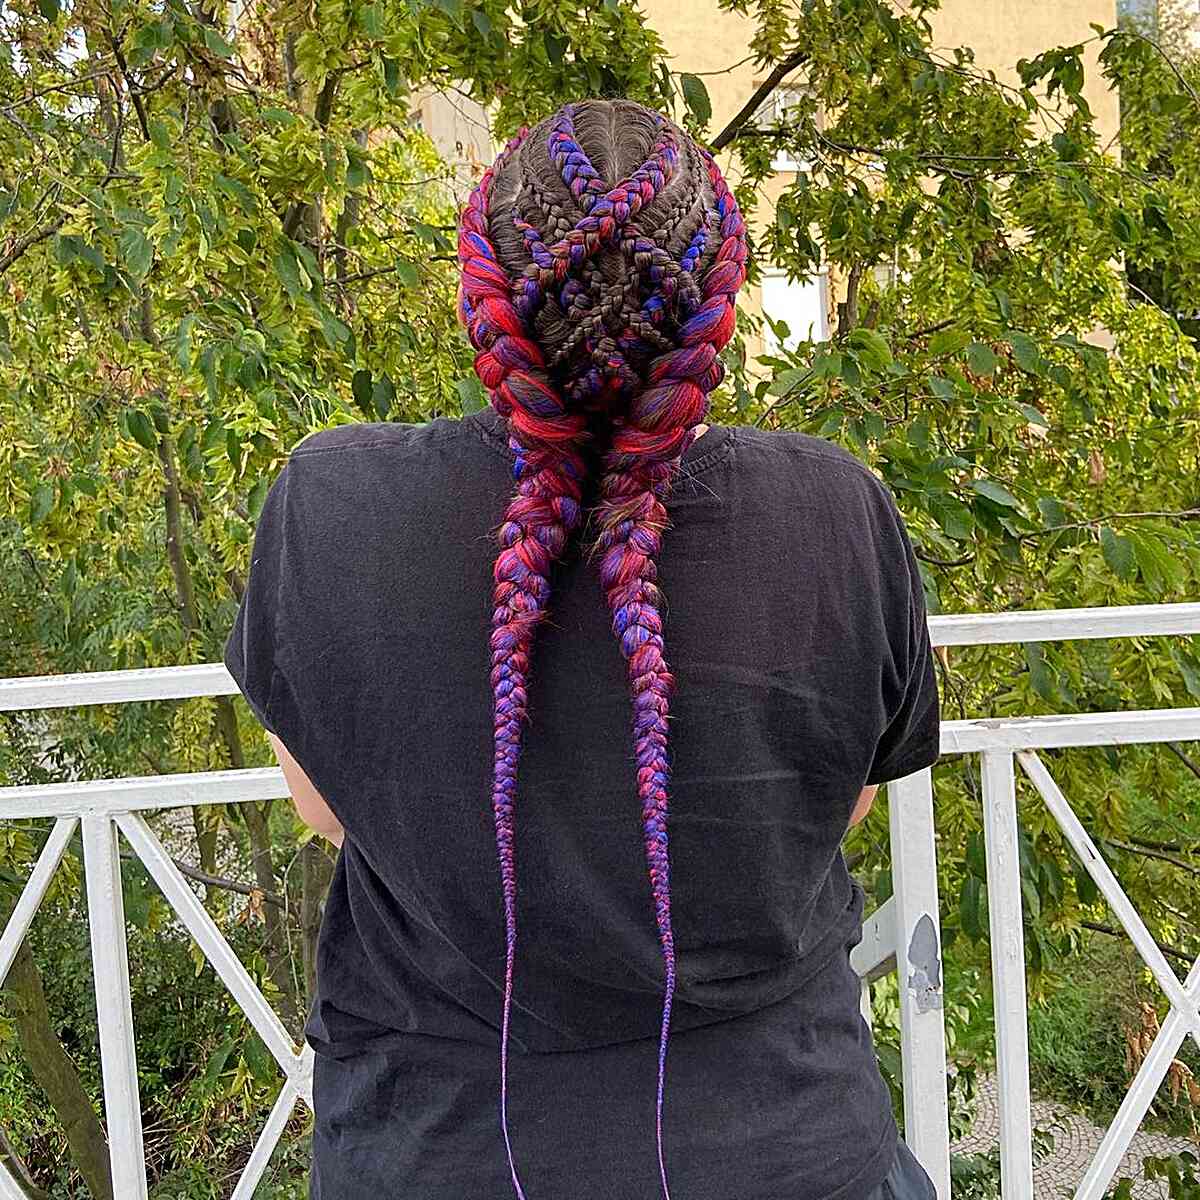 Long-Length Pink and Purple Kanekalon Braids in Pigtails